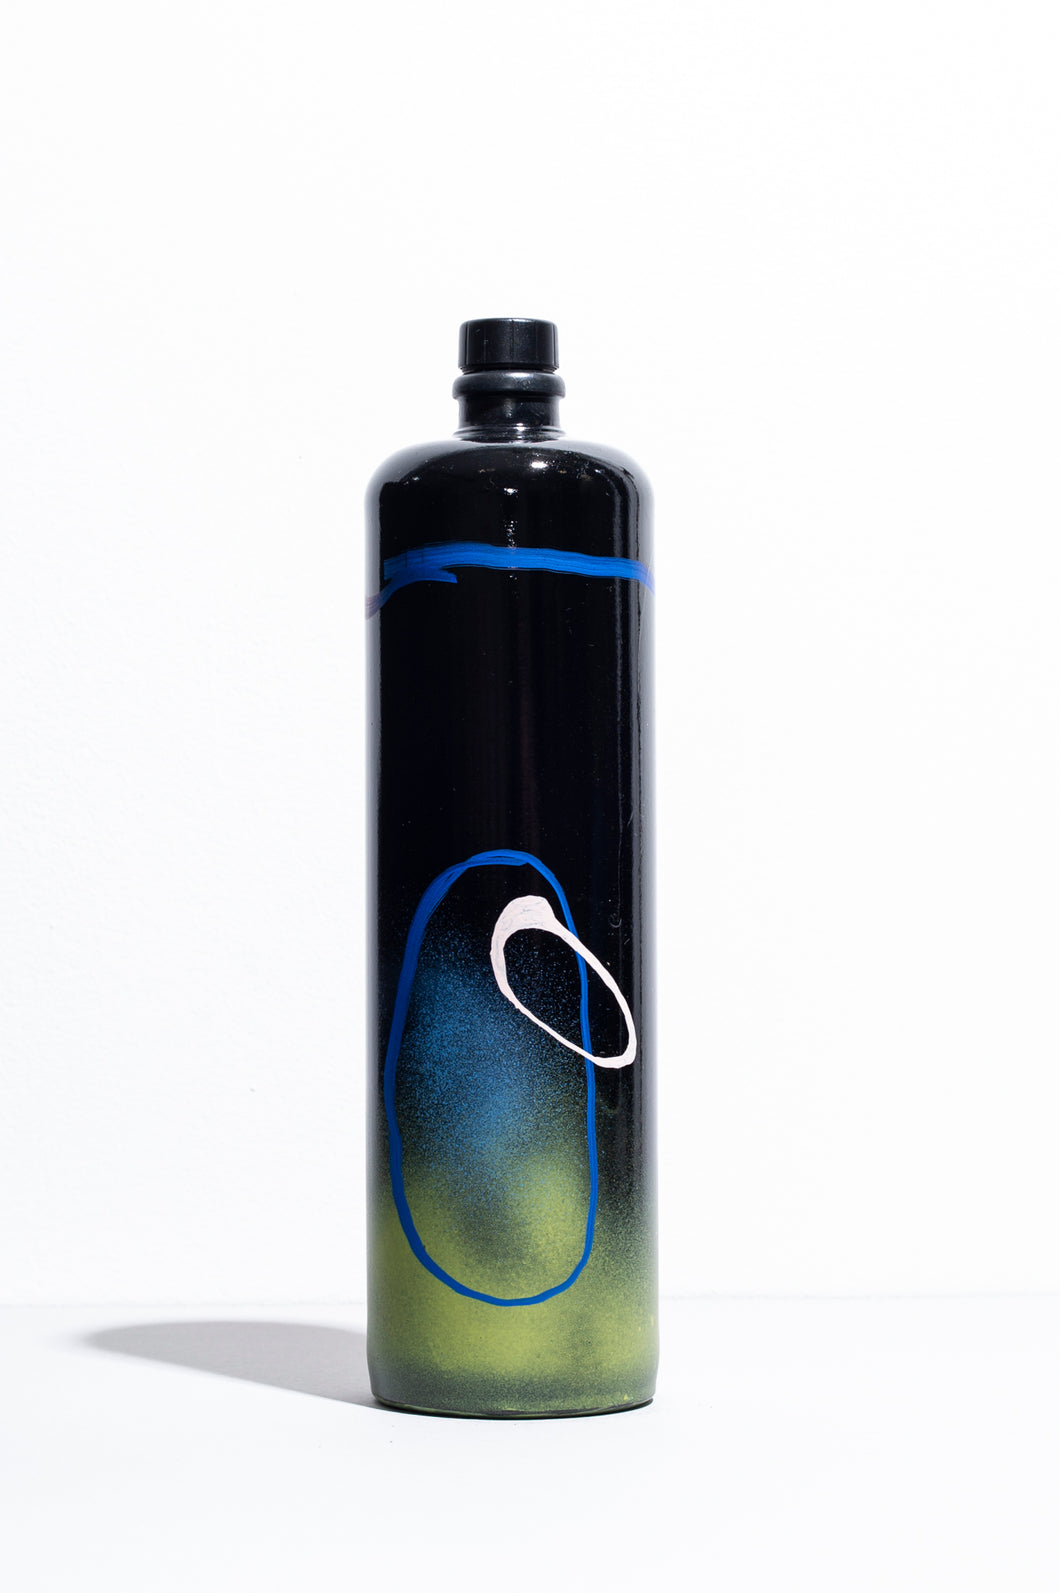 N°21 ART EDITION / UNFILTERED VIRGIN OLIVE OIL EXTRA 1L